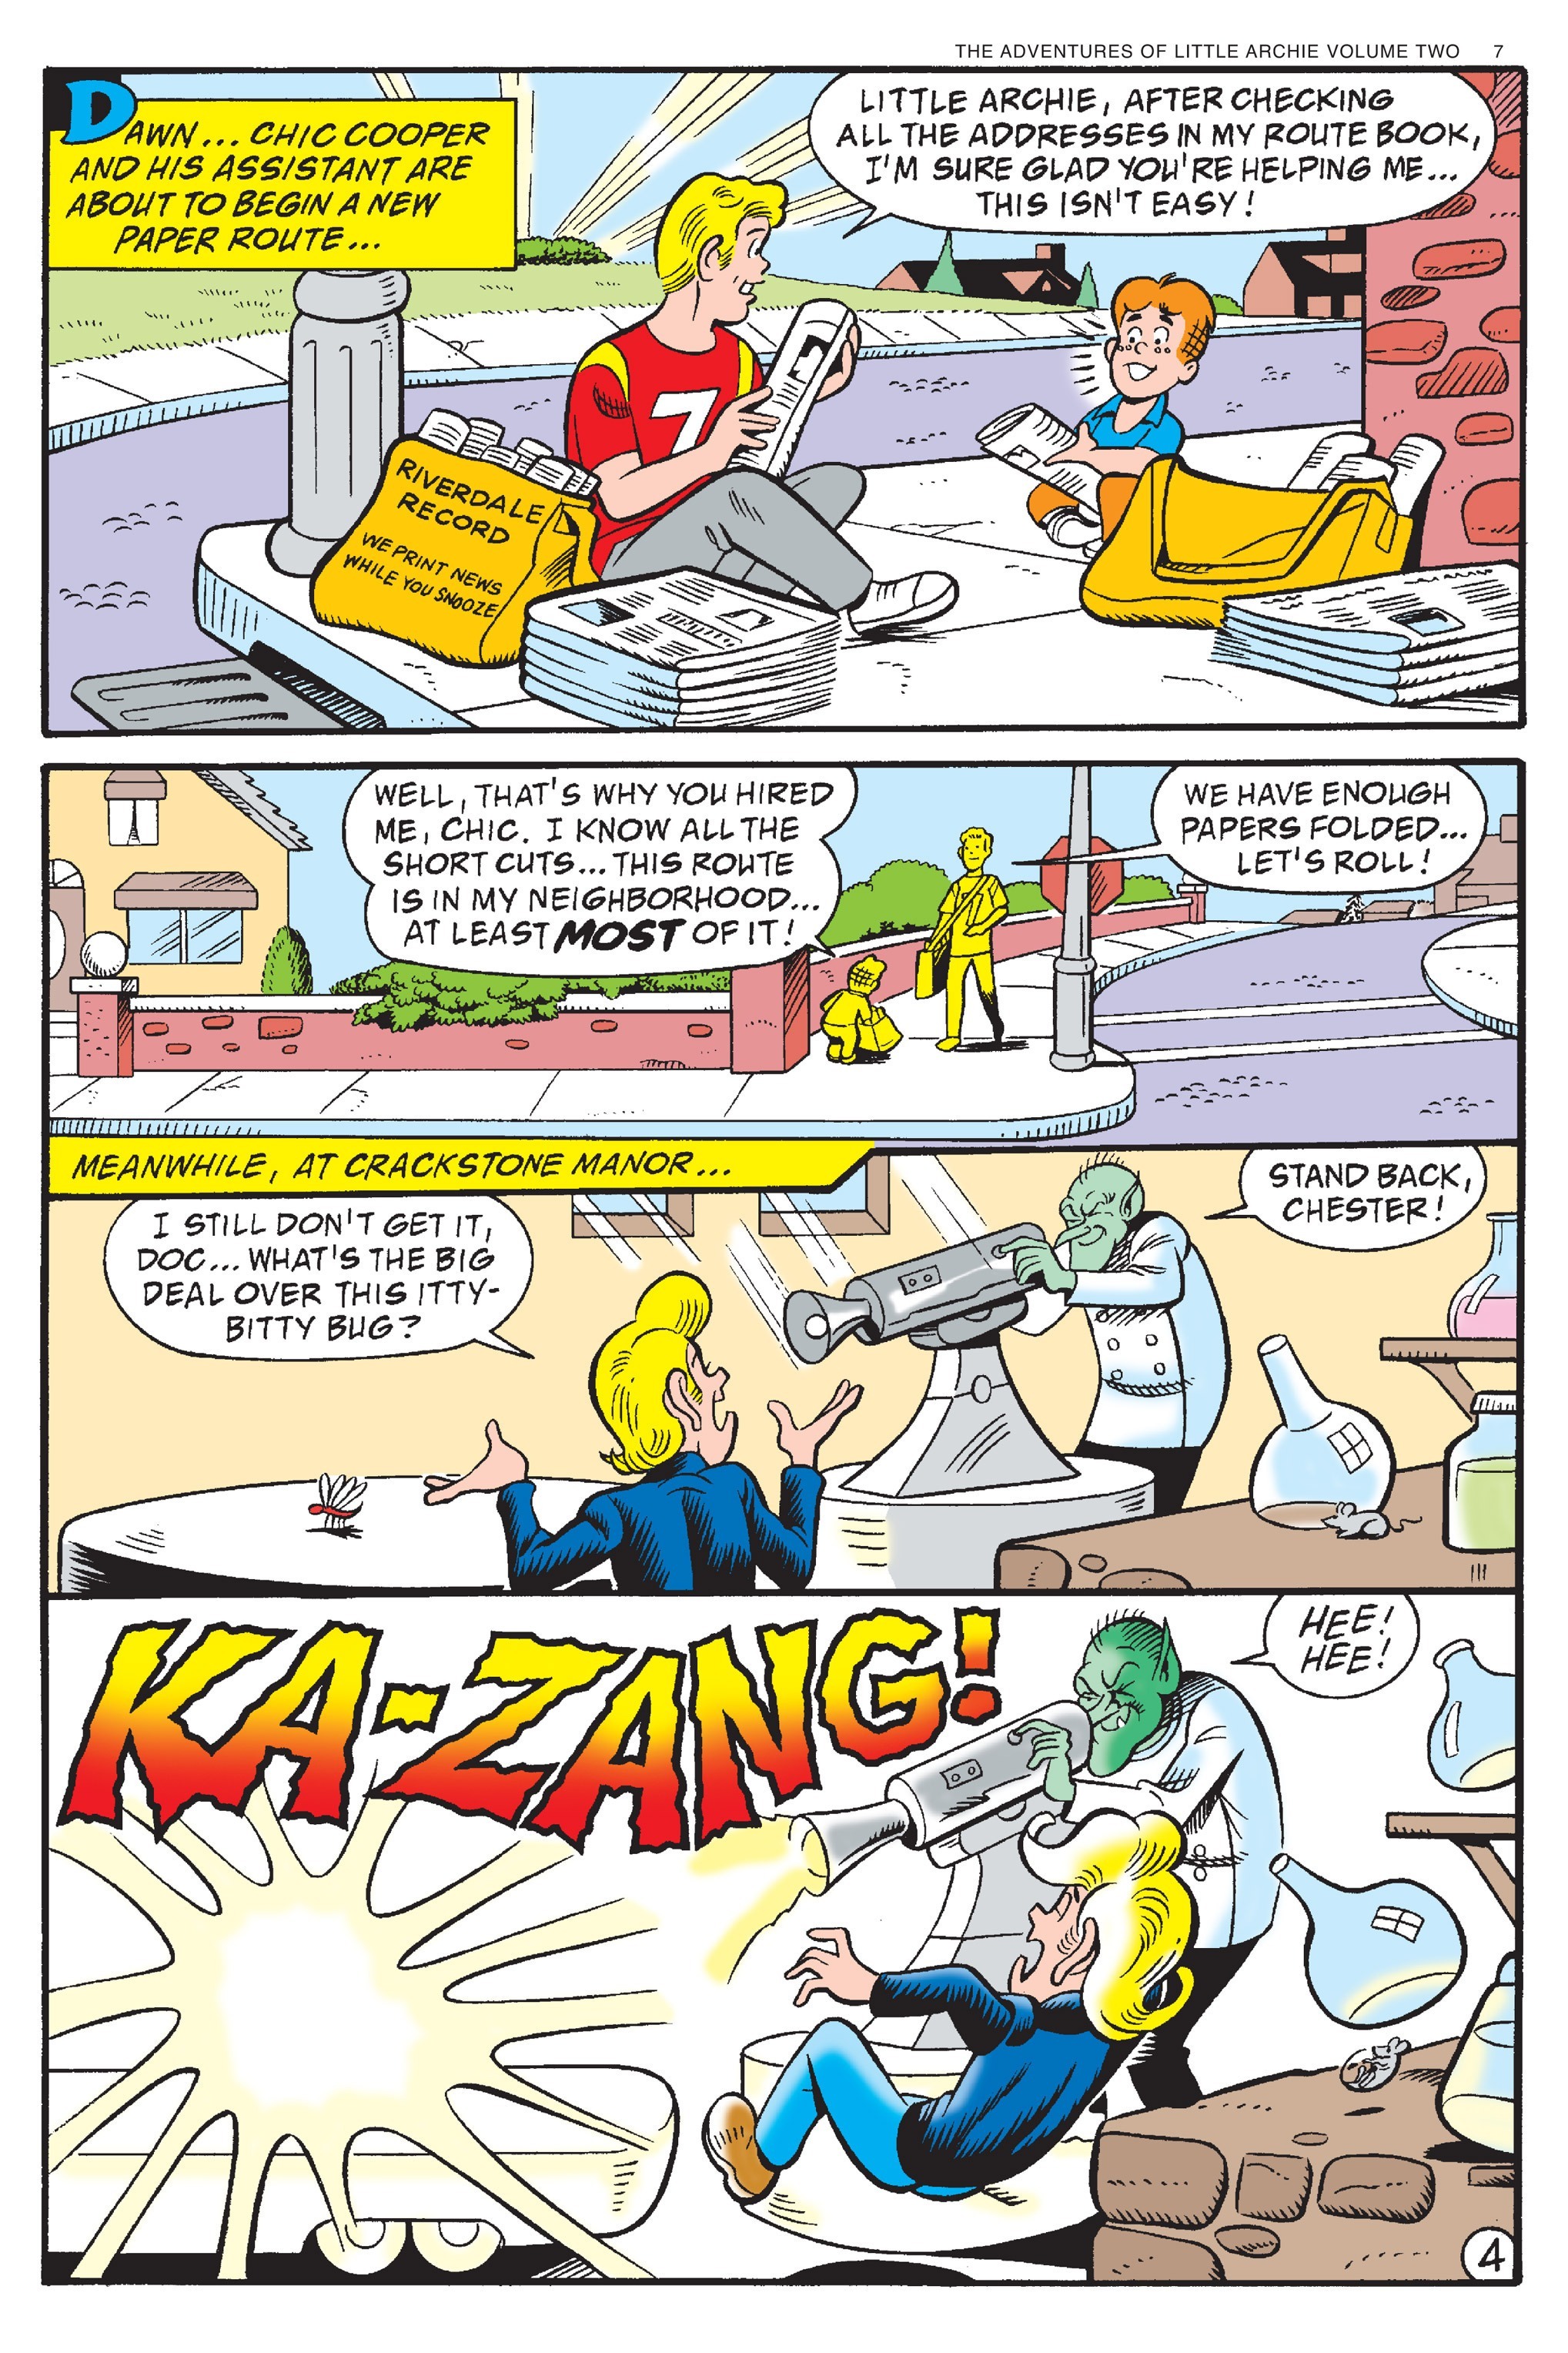 Read online Adventures of Little Archie comic -  Issue # TPB 2 - 8